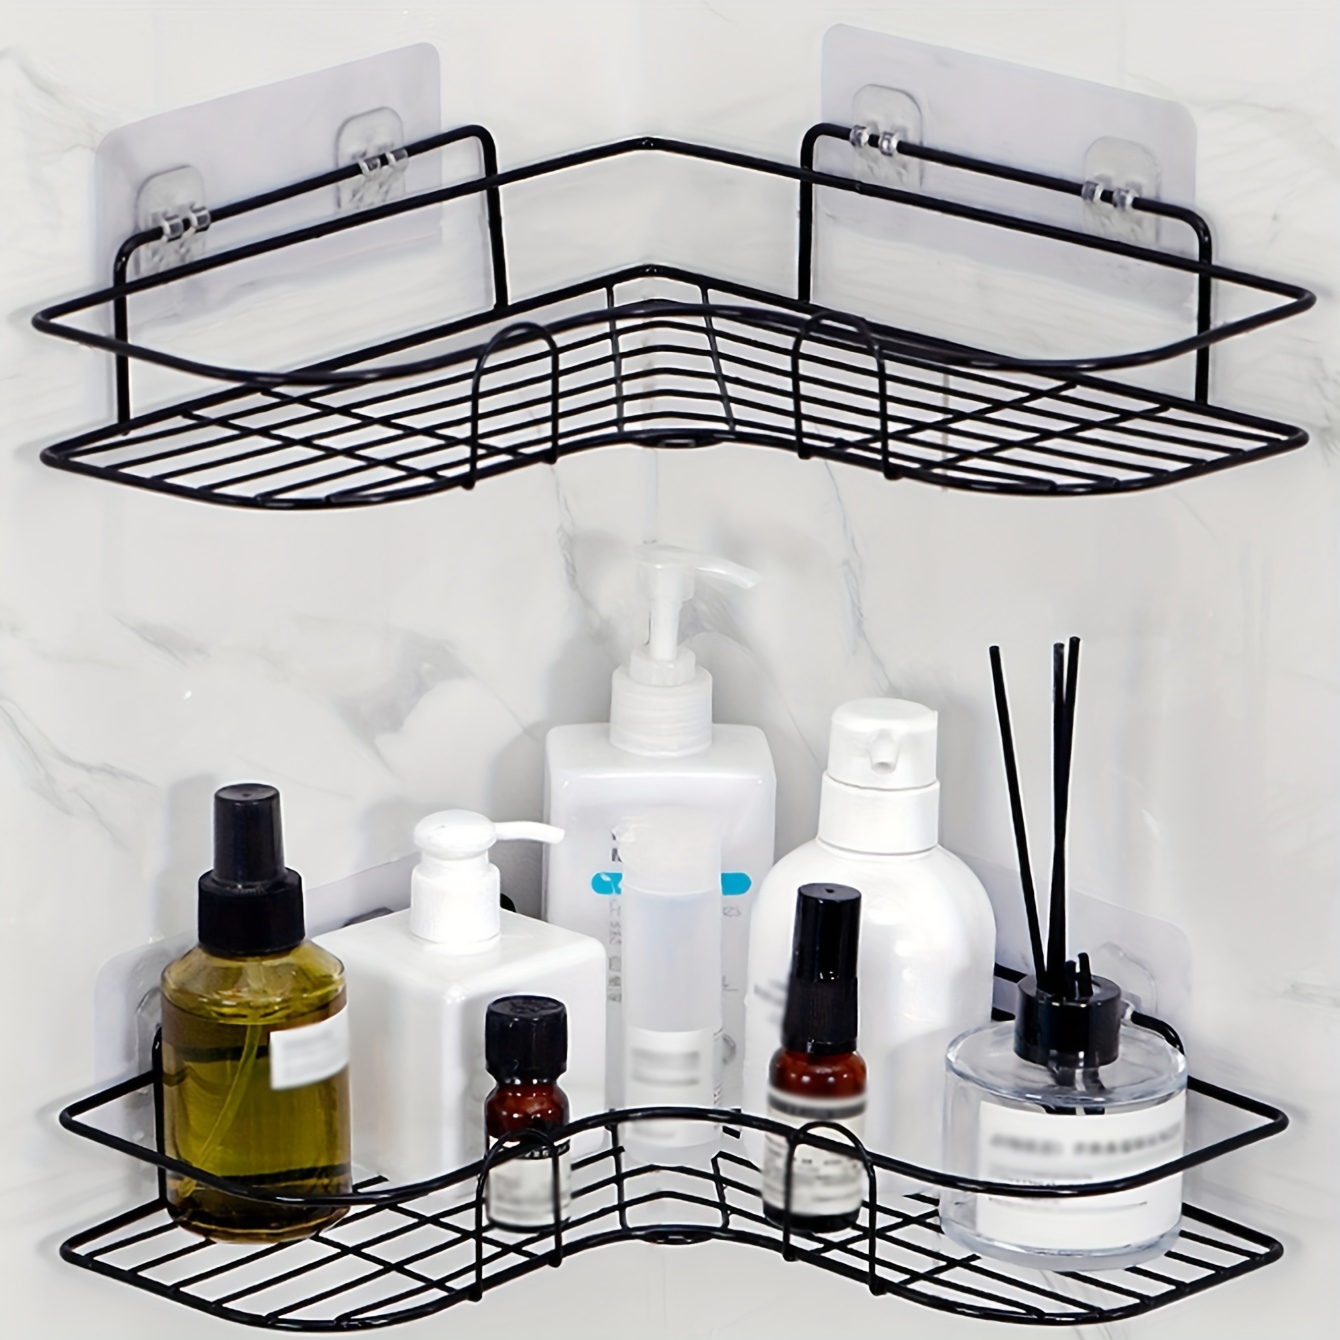 2 Pcs Adhesive Acrylic Corner Shower Caddy Shelf with Hooks Hollow Wall  Mounted No Drilling Clear Corner Shelf for Shower Kitchen Organizer